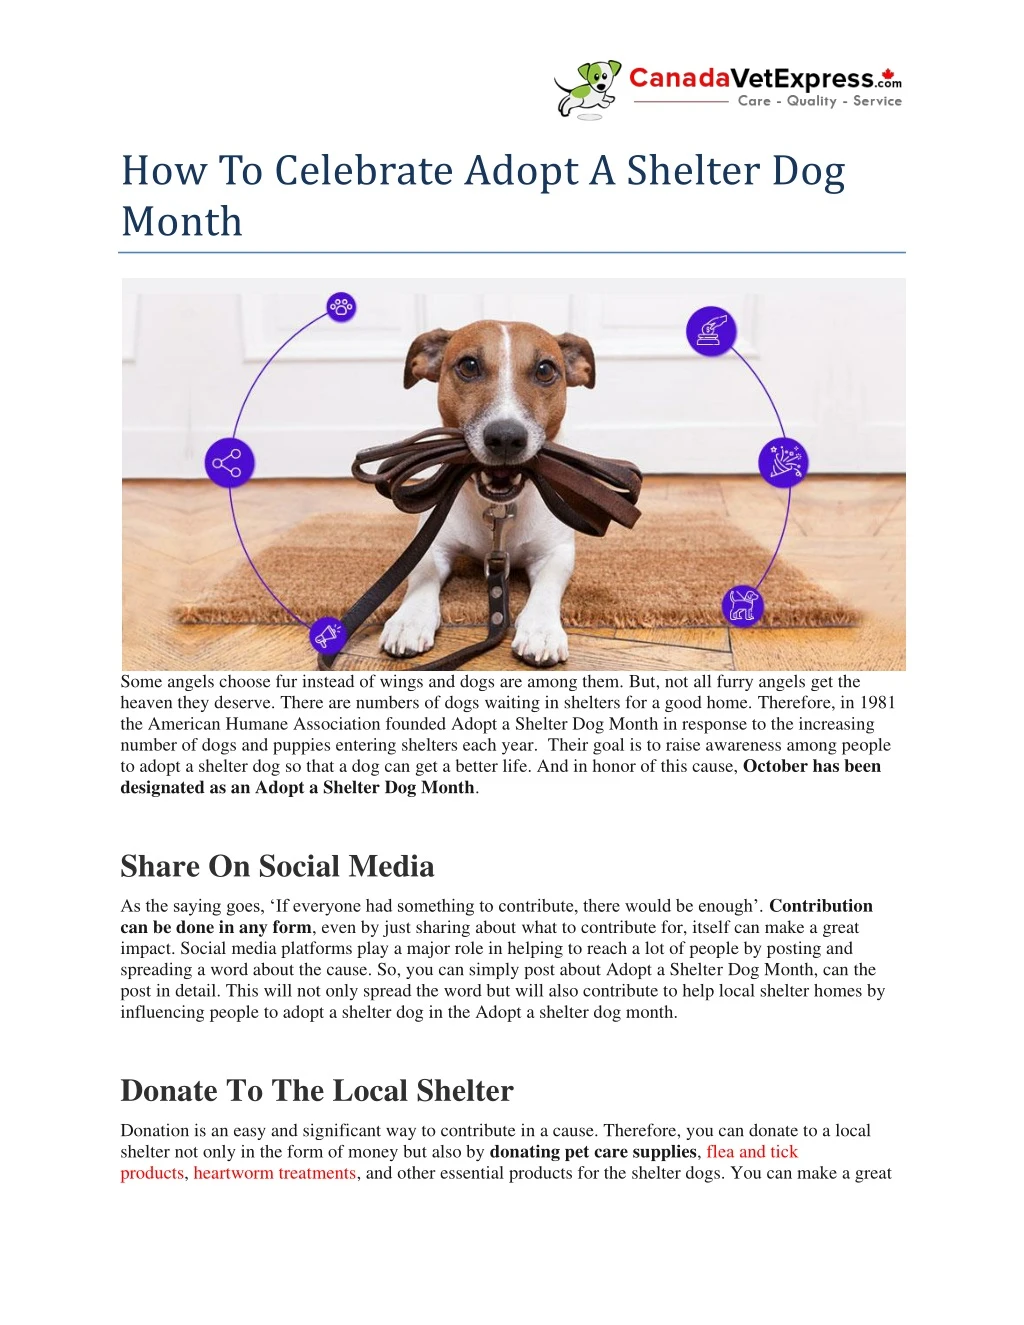 how to celebrate adopt a shelter dog month